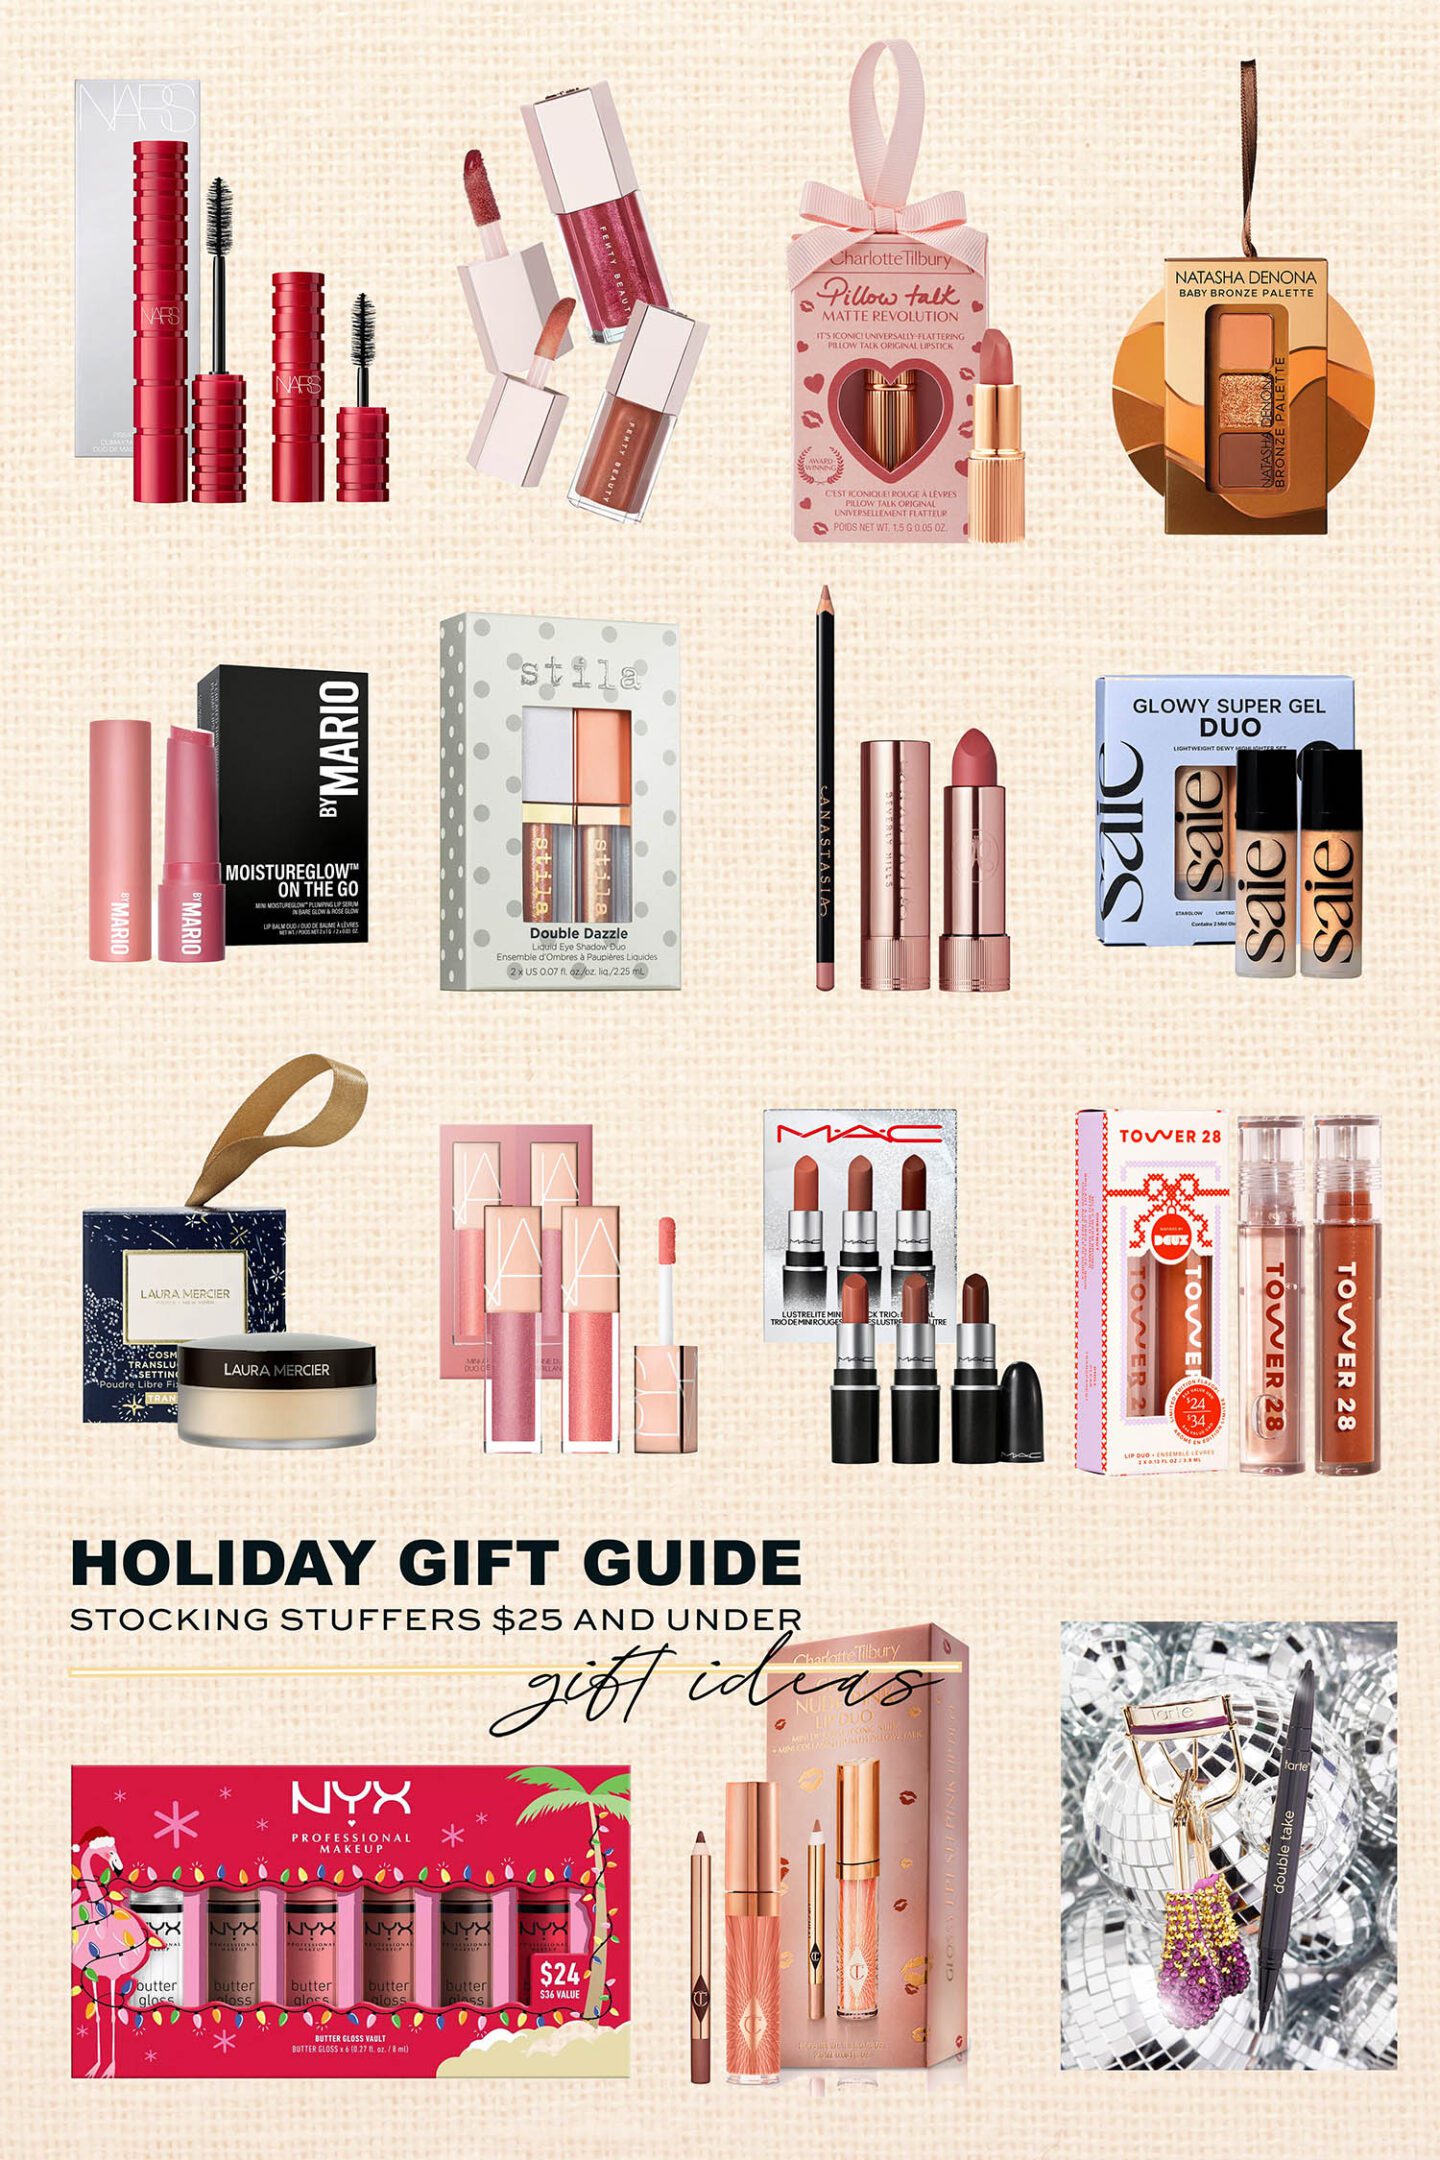 Makeup Holiday Gift Ideas and Stocking Stuffers $25 and Under